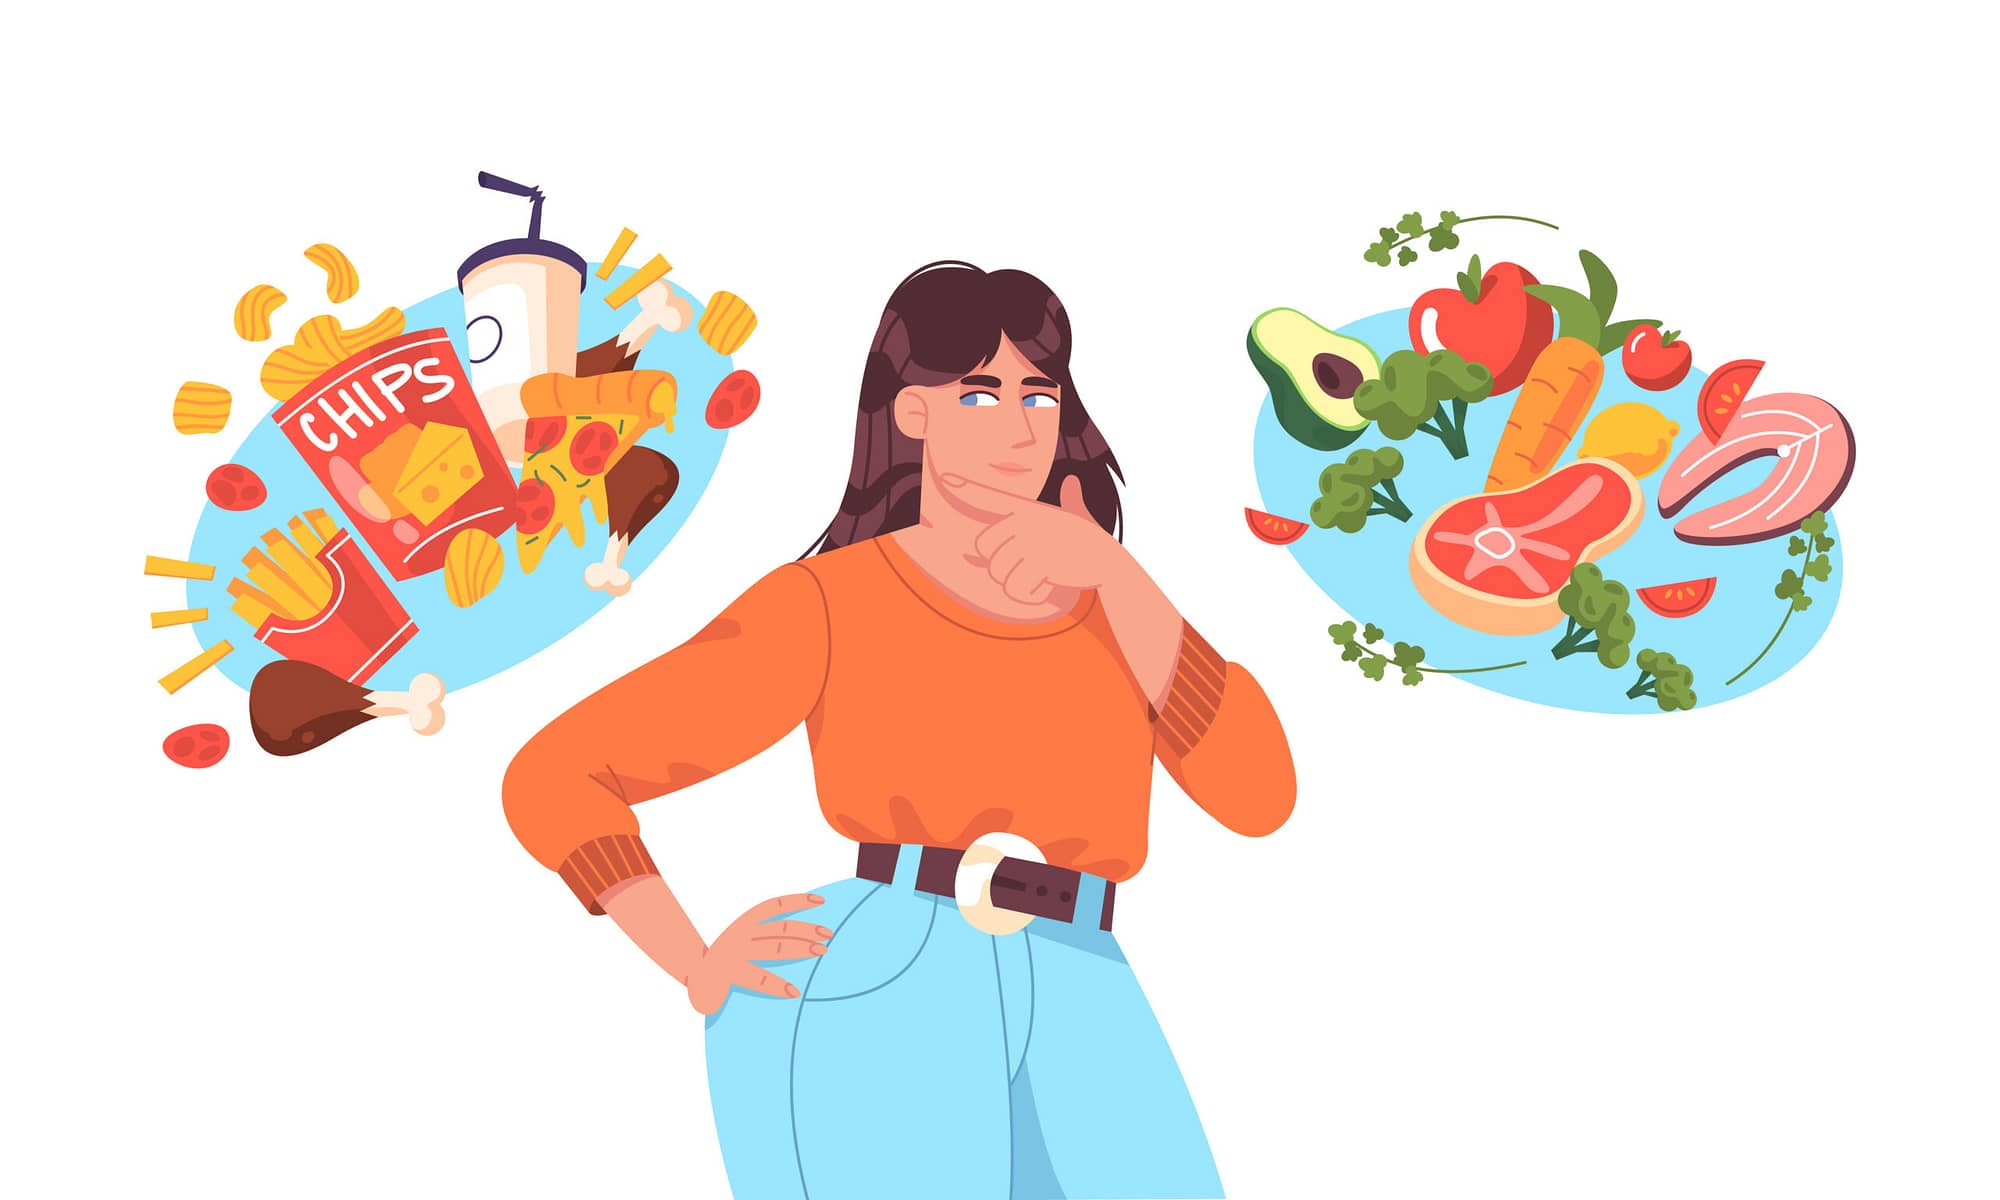 Fat woman choosing between good healthy and bad unhealthy food. Junk food vs balanced menu nutrition comparison concept. Female flat character thinking about diet, extra calories or weight loss.